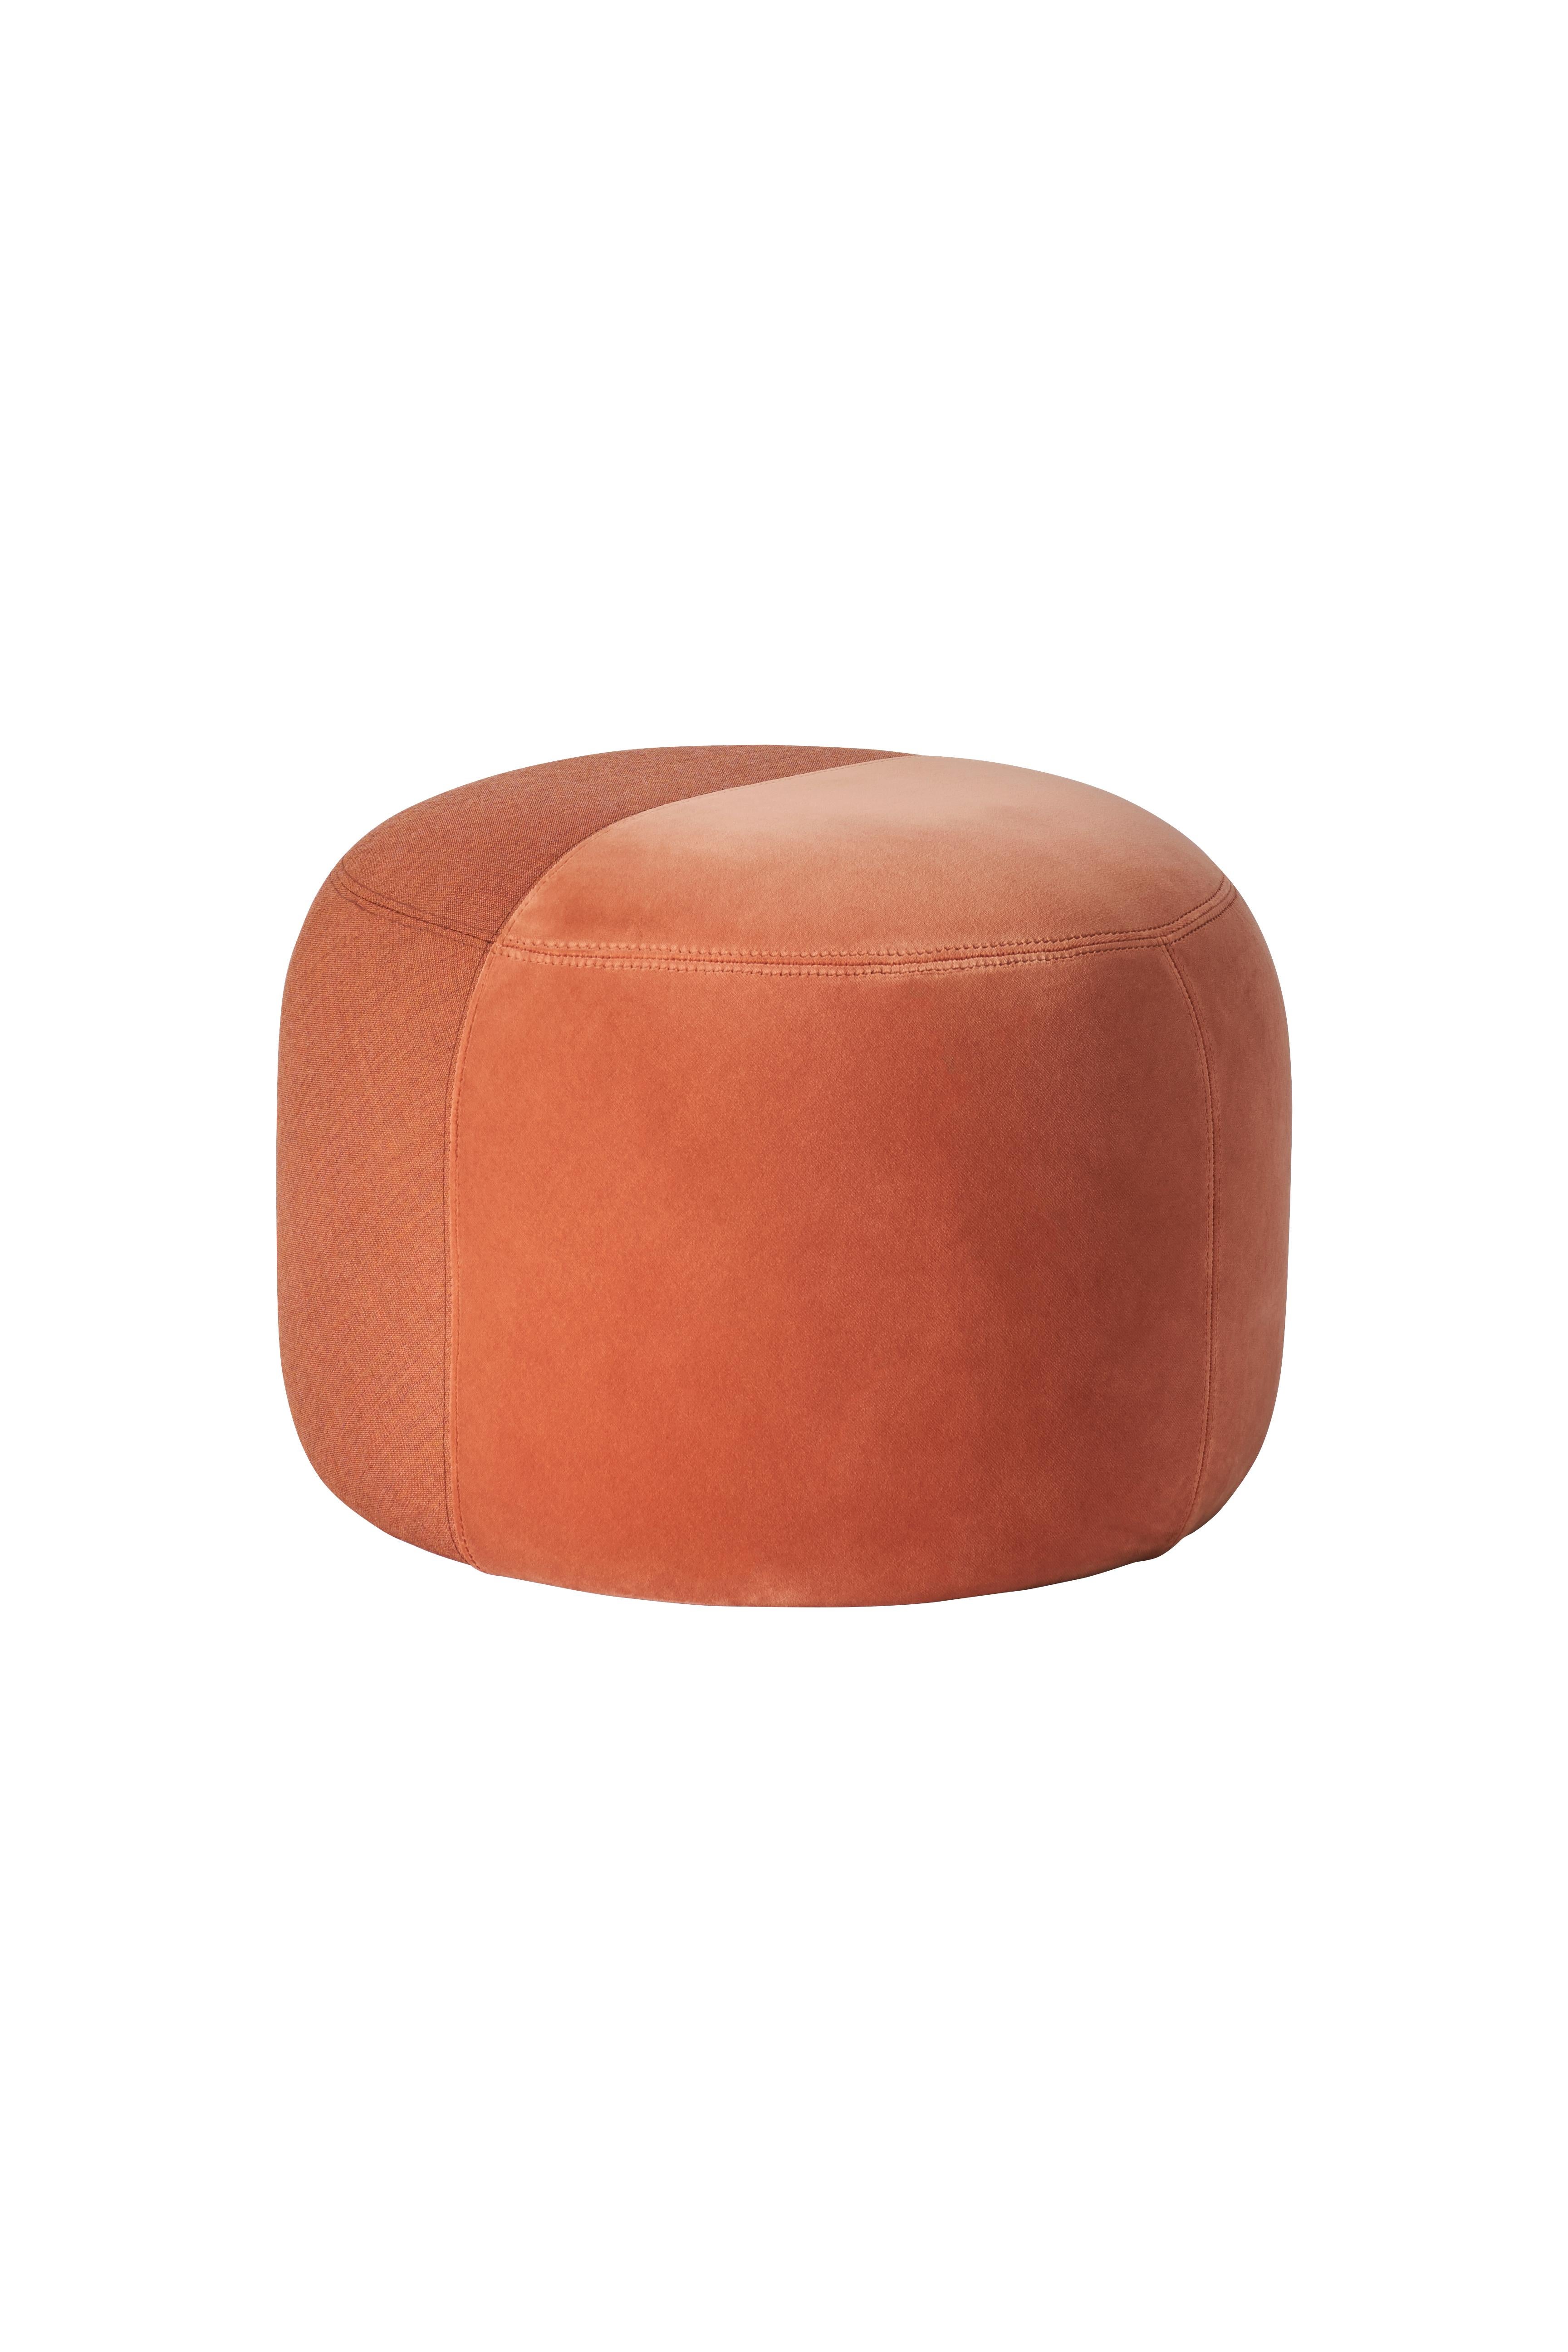 For Sale: Pink (Canvas 454, Ritz 8008) Dainty Pouf, by Charlotte Høncke from Warm Nordic